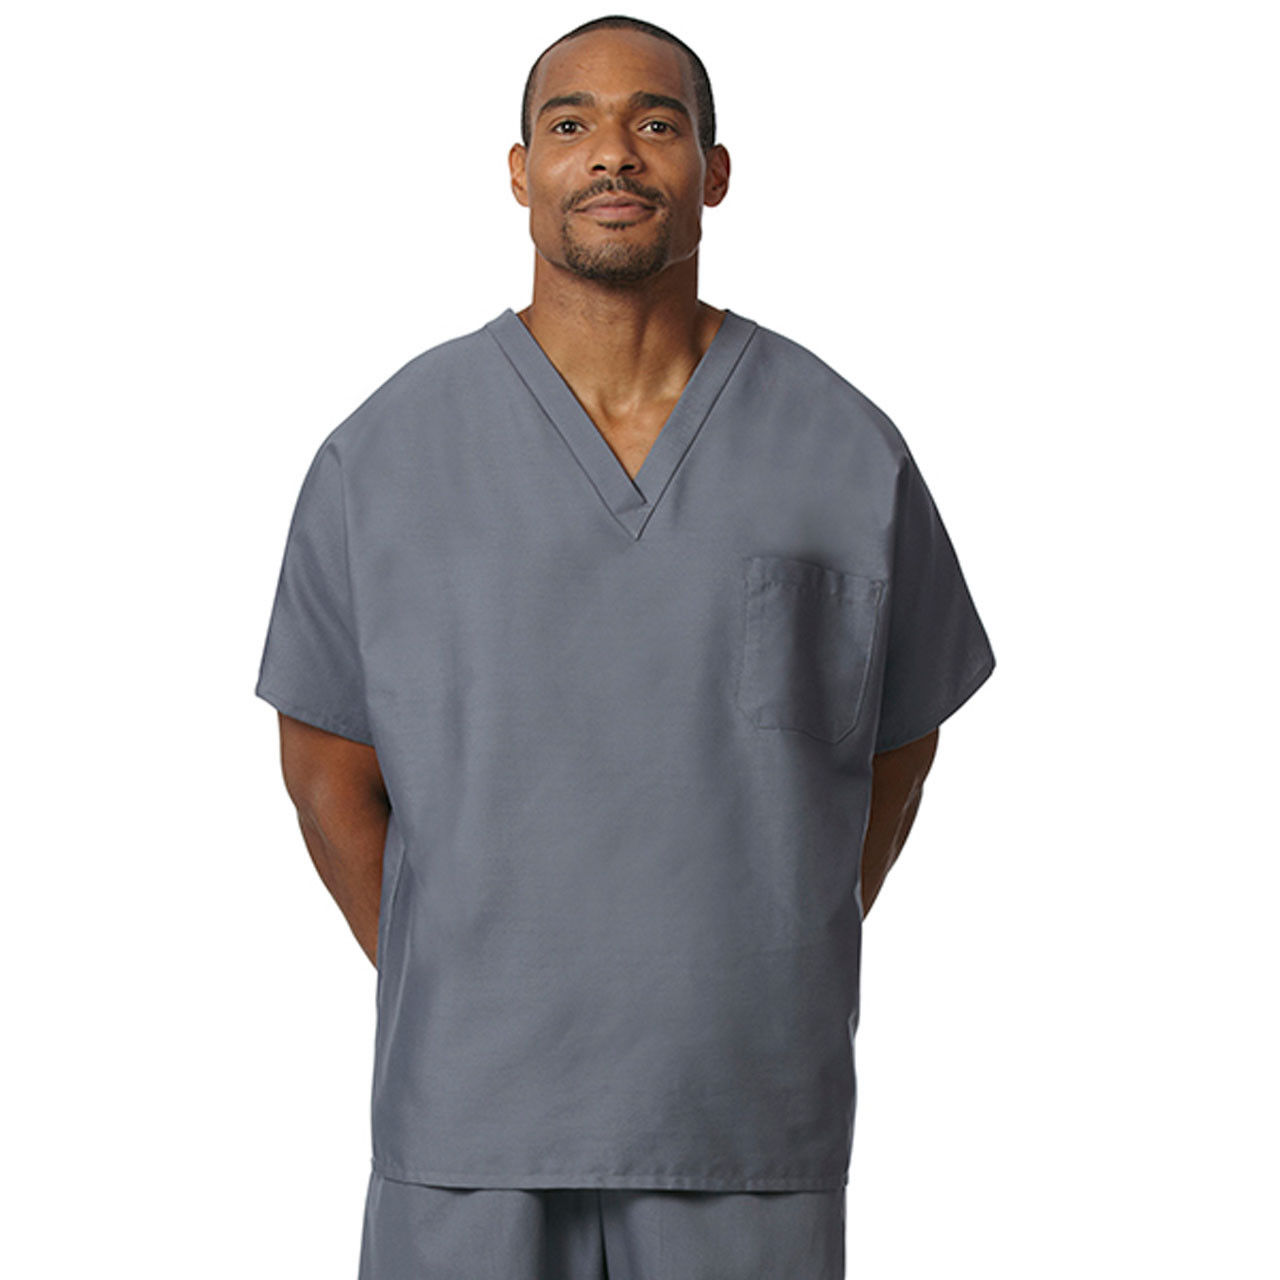 Womens and Mens Tall Scrub Tops - Tall, in Pewter Gray - Bulk Case of 72 Questions & Answers